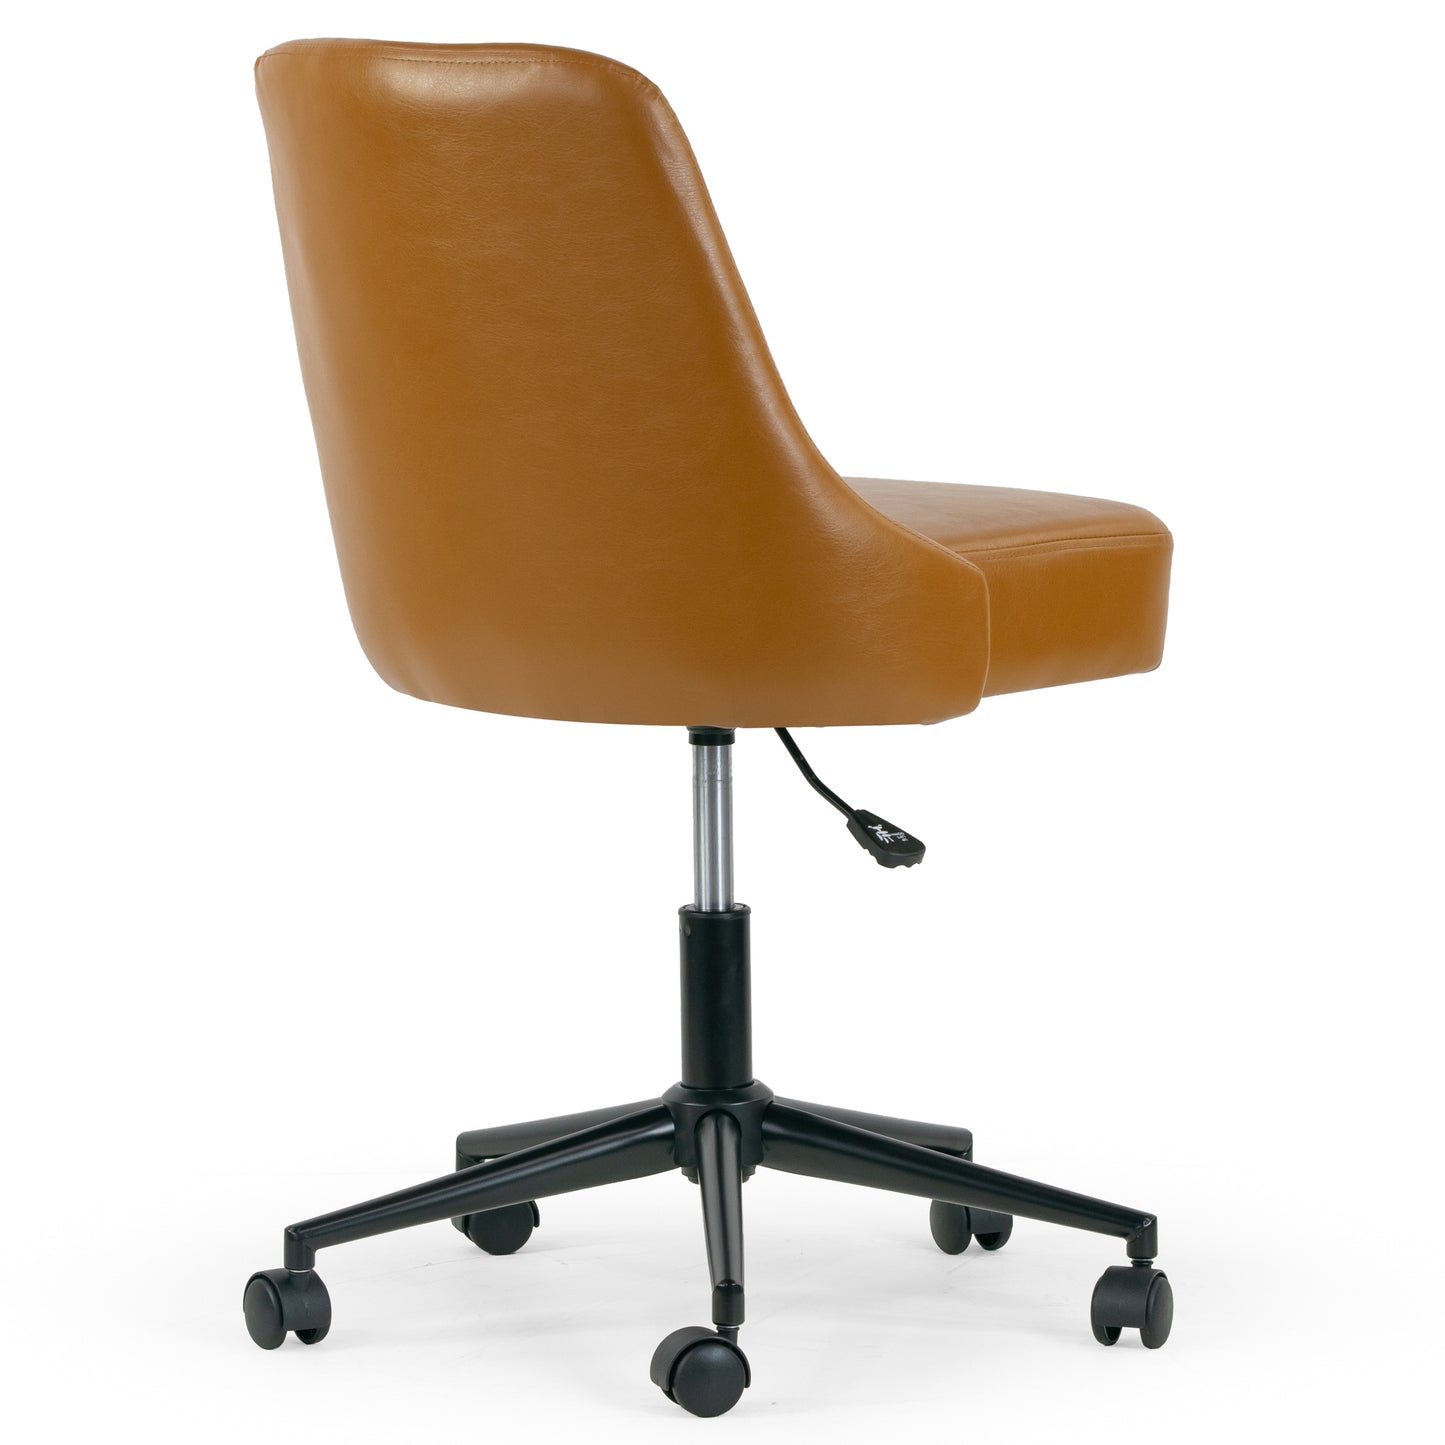 Aurica Light Brown Faux Leather Adjustable Height Swivel Office Chair with Wheel Base